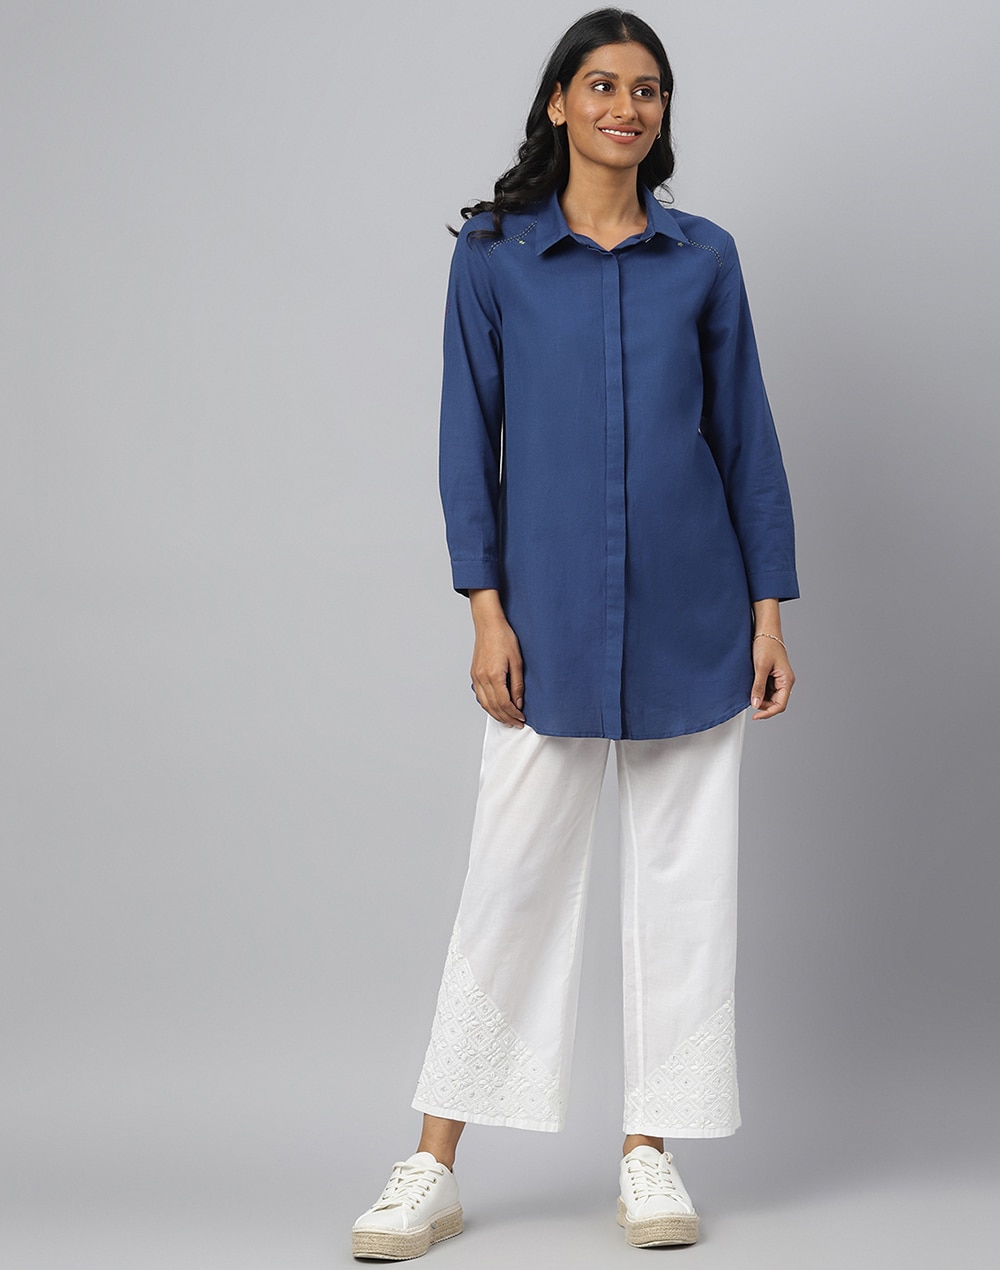 Buy Cotton Front Button Down Shirt for Women Online at Fabindia